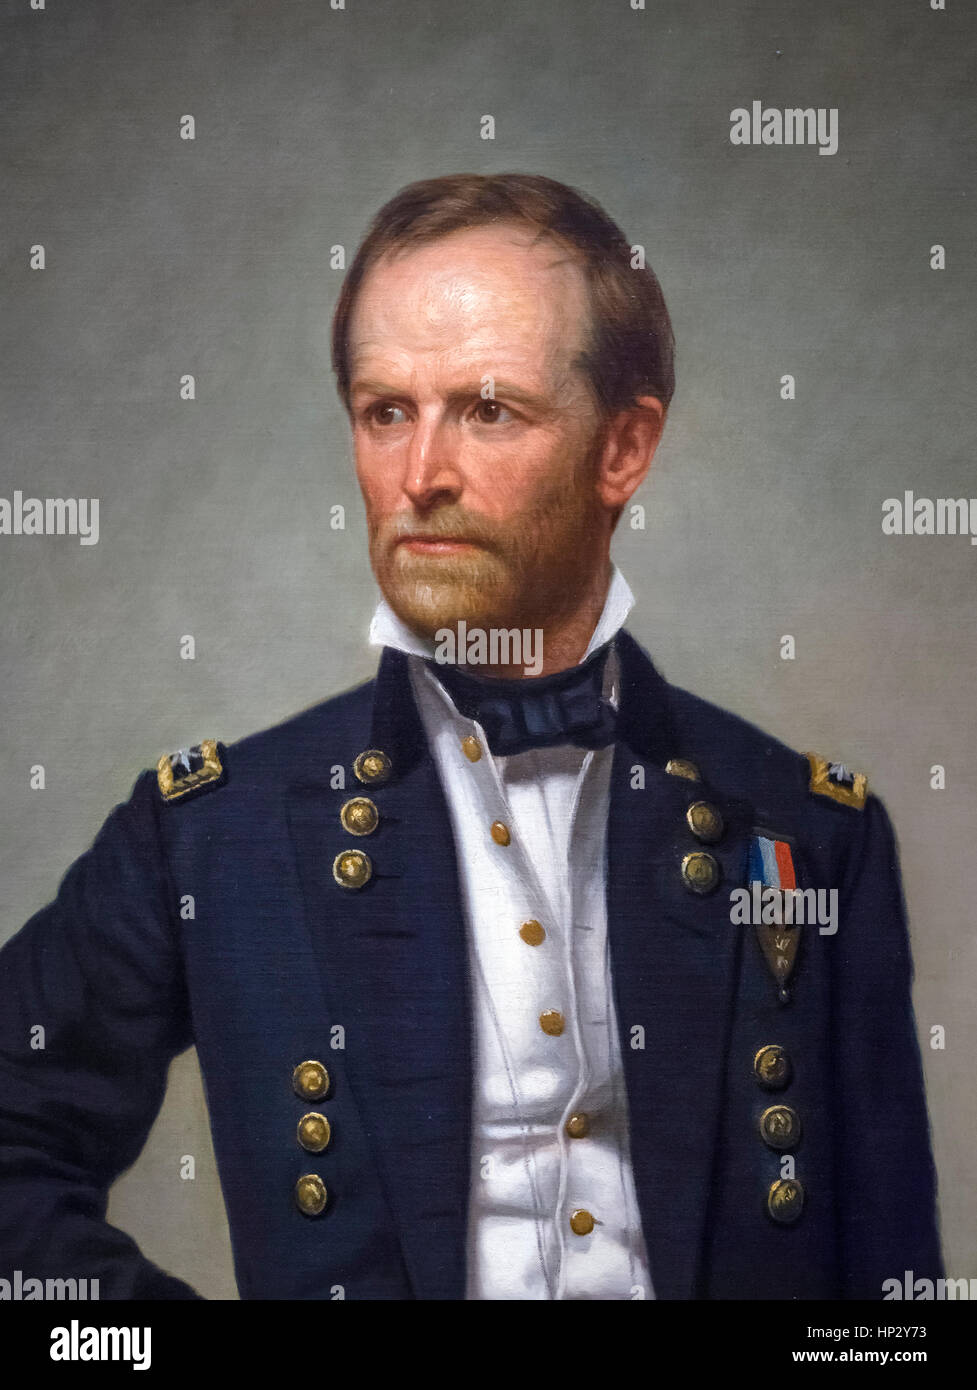 William T Sherman. Portrait of Civil War Union army commander, General William Tecumseh Sherman (1820-1891) by George Peter Alexander Healy, oil on canvas, 1866. Detail from a larger painting, HP2Y7D Stock Photo